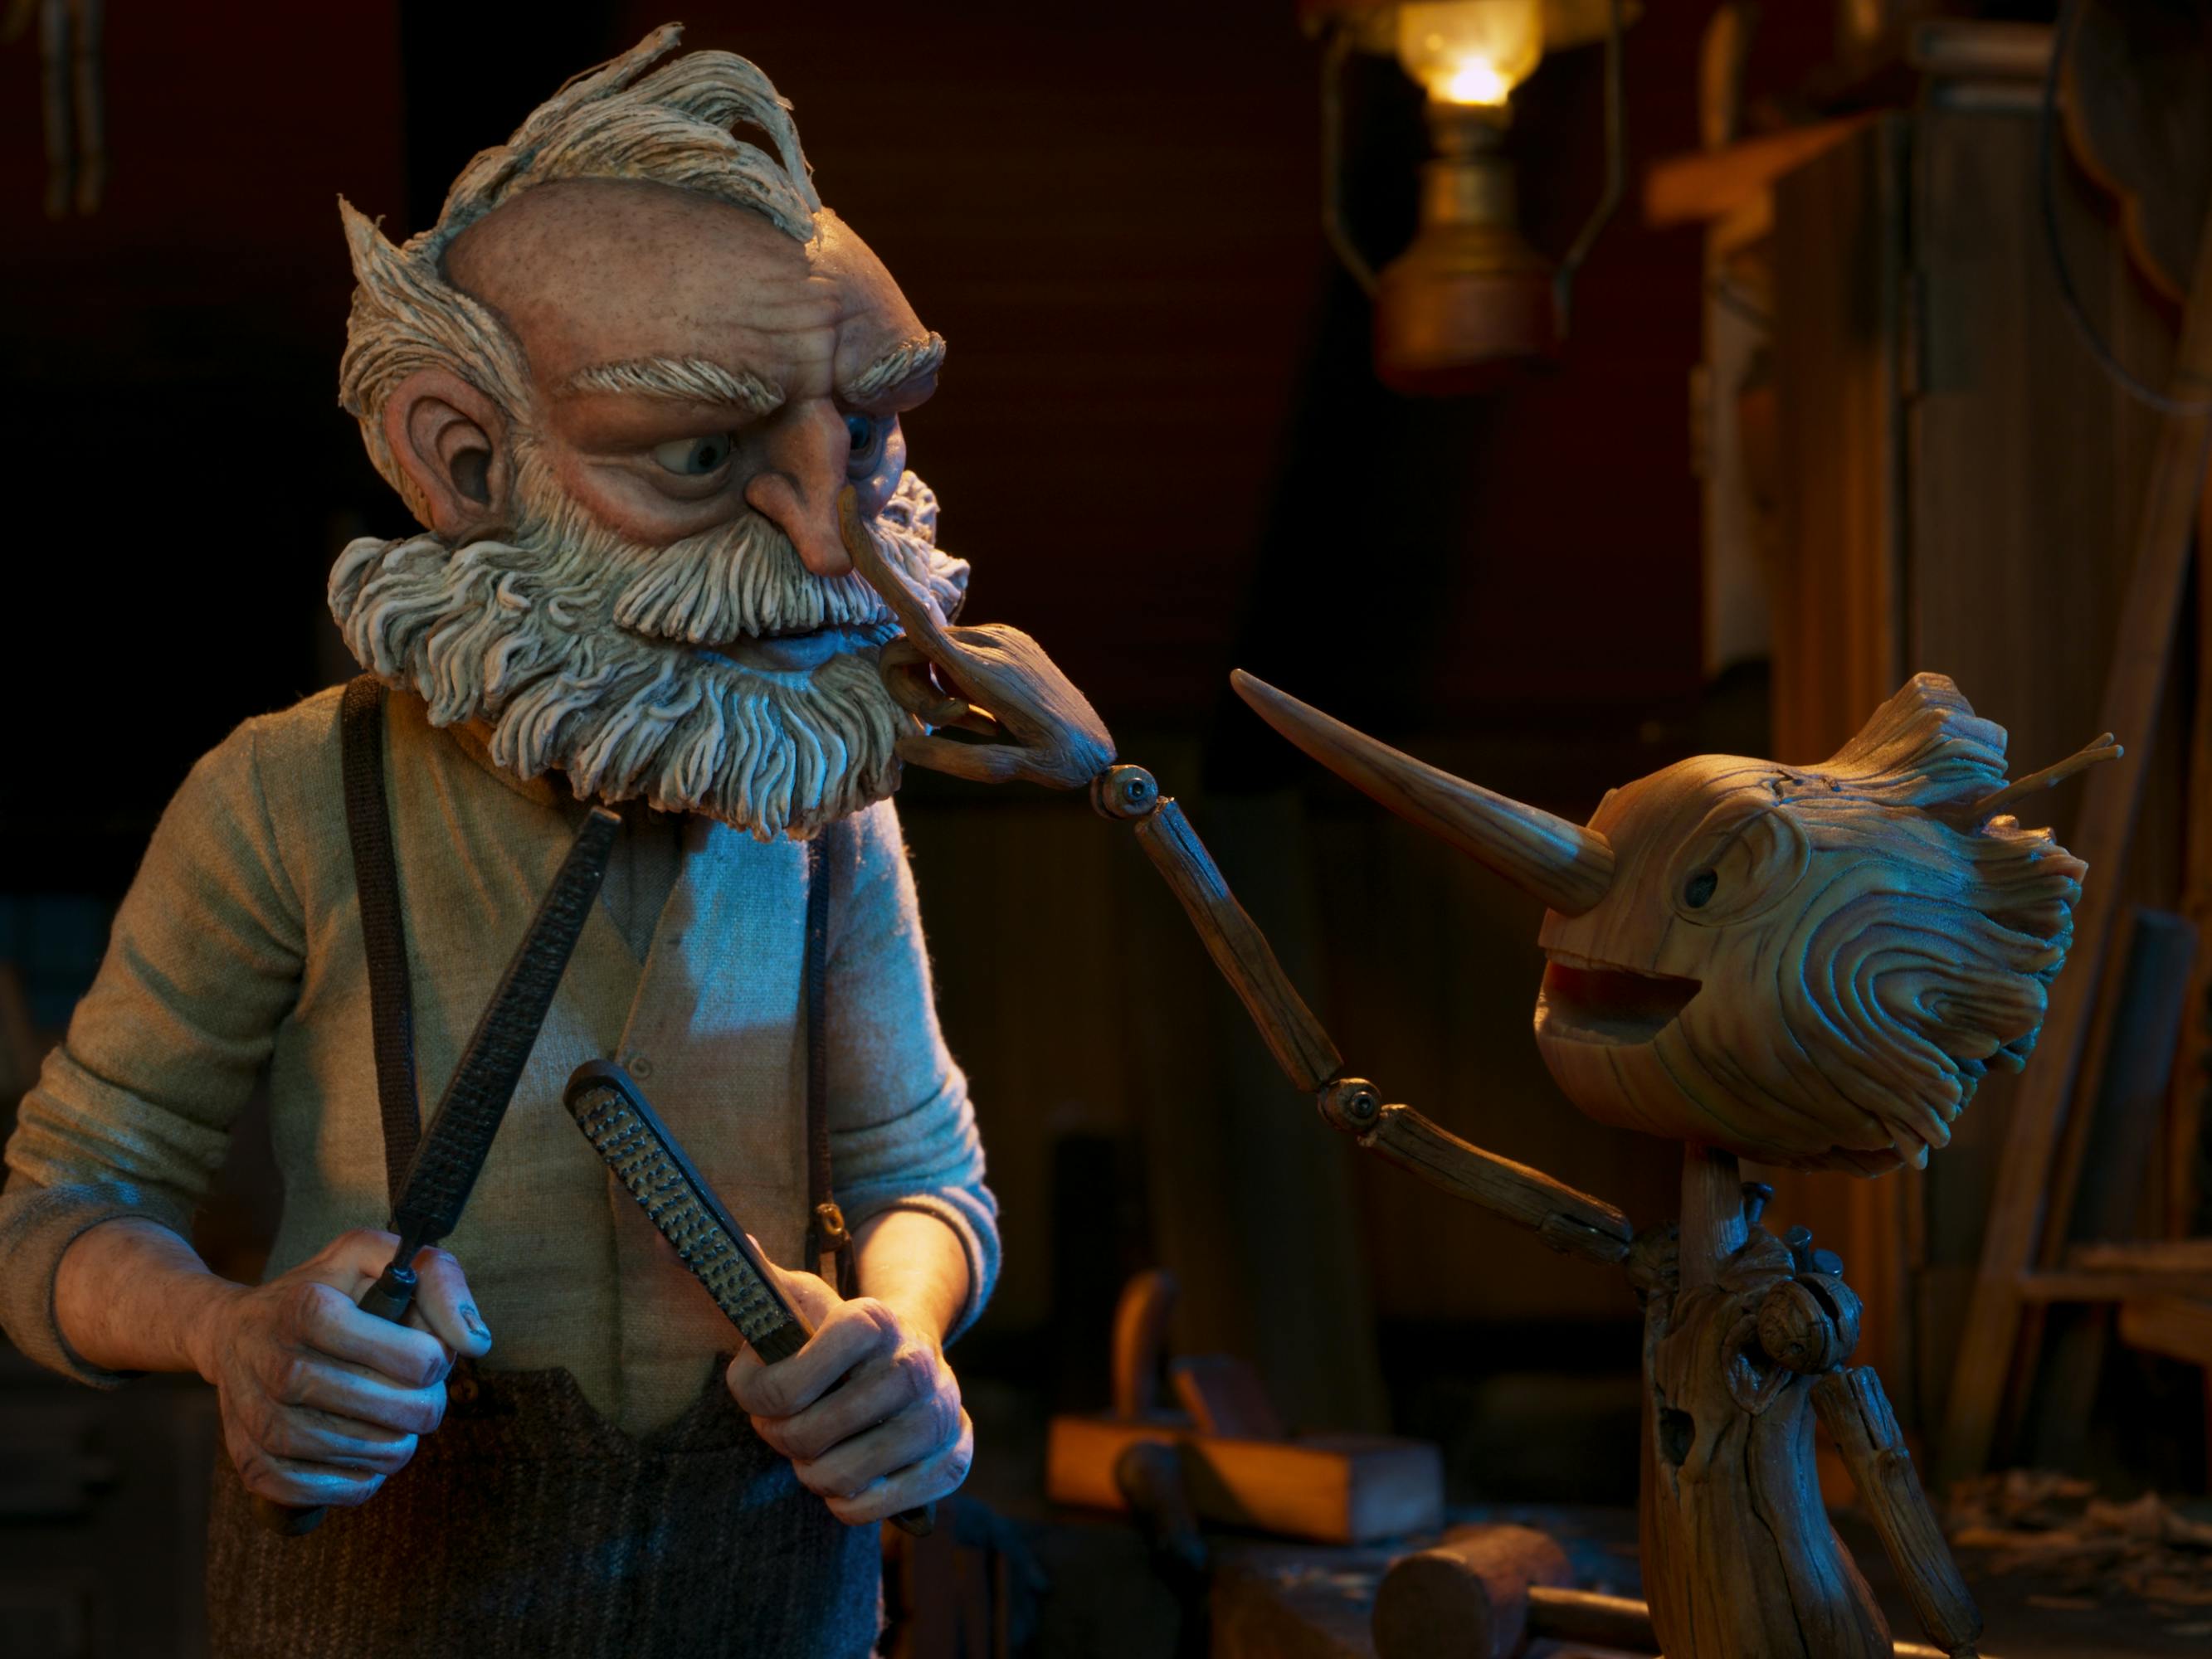 Geppetto and Pinocchio talk over woodworking tools in the dark.